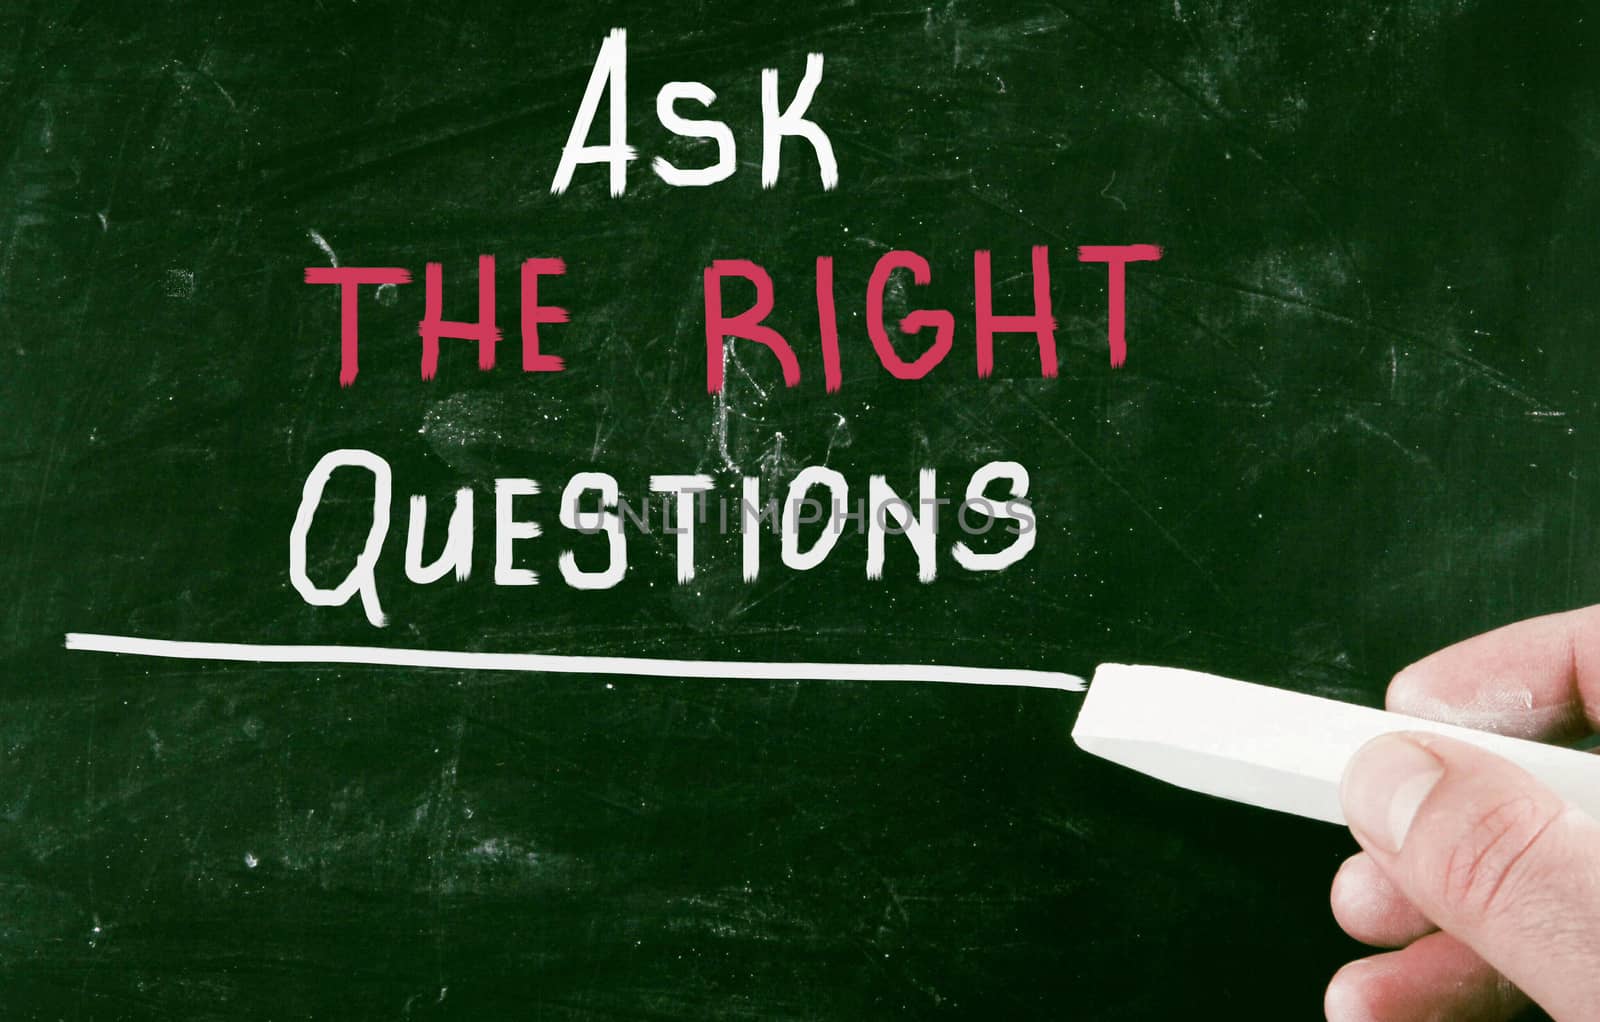 ask the right questions by nenov